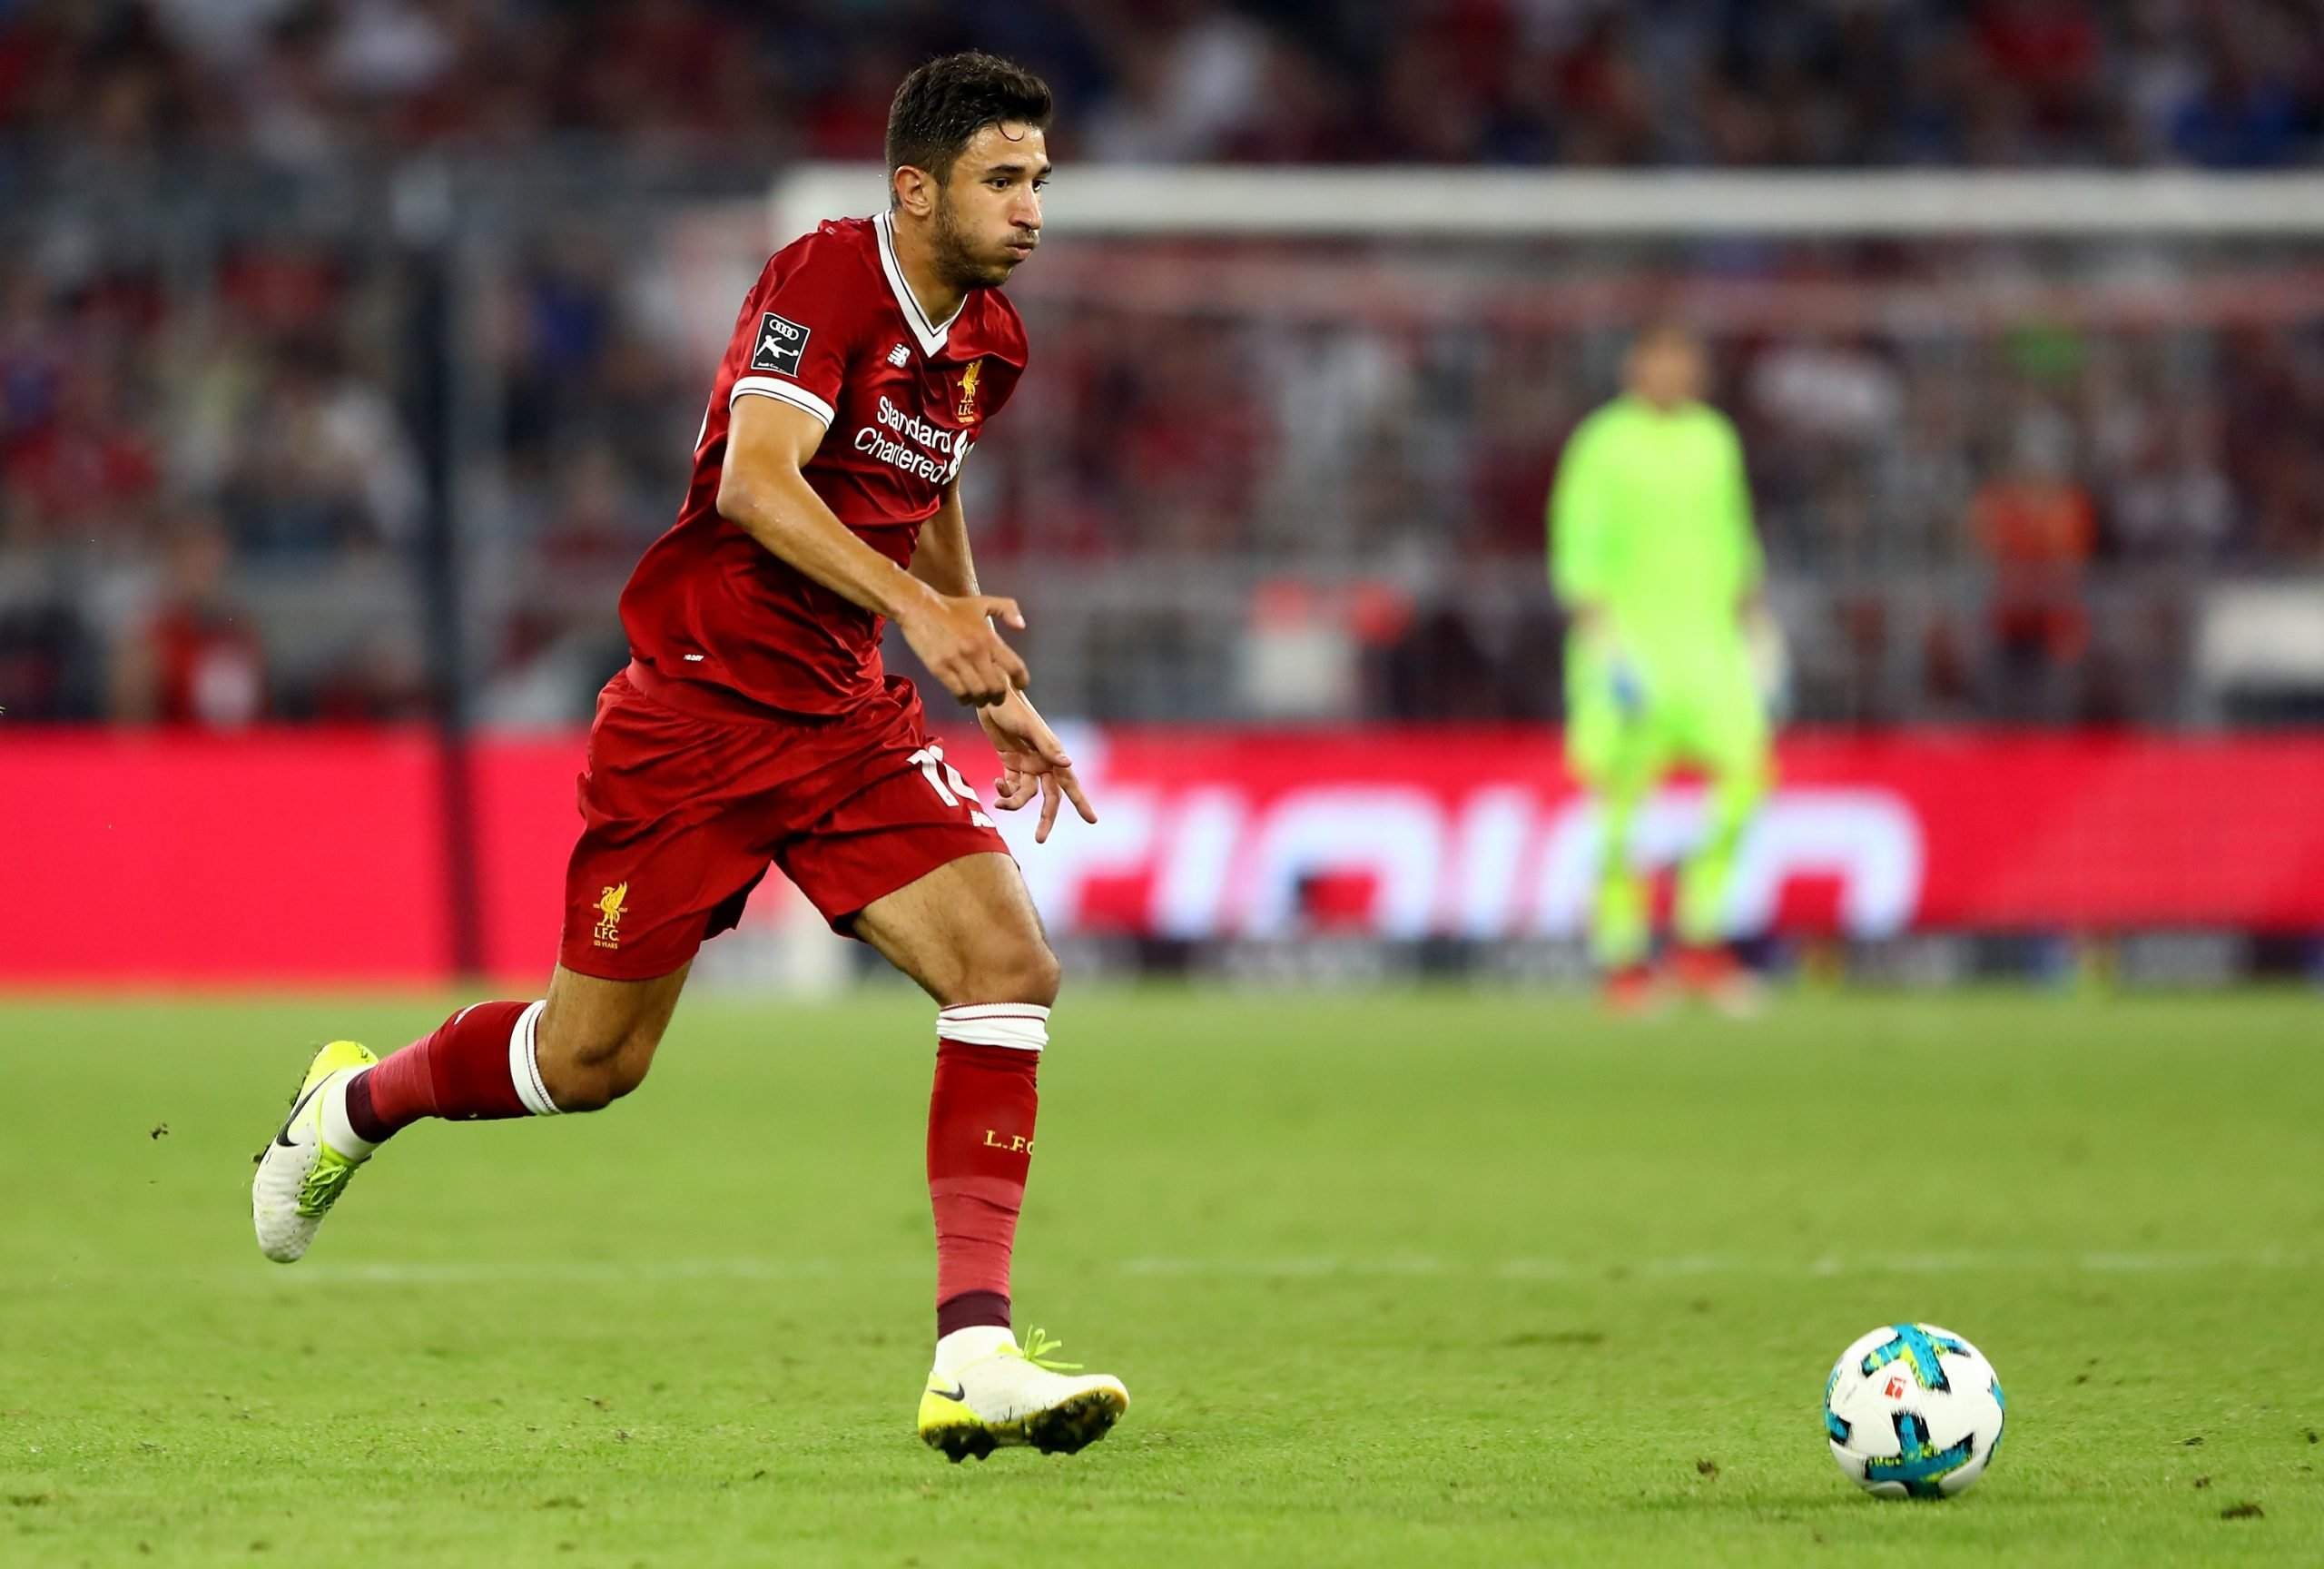 Marko Grujic of Liverpool runs with the ball during the Audi Cup 2017 match between Liverpool FC and Atletico Madrid at Allianz Arena on August 2, 2017 in Munich, Germany.  (Photo by Martin Rose/Bongarts/Getty Images)